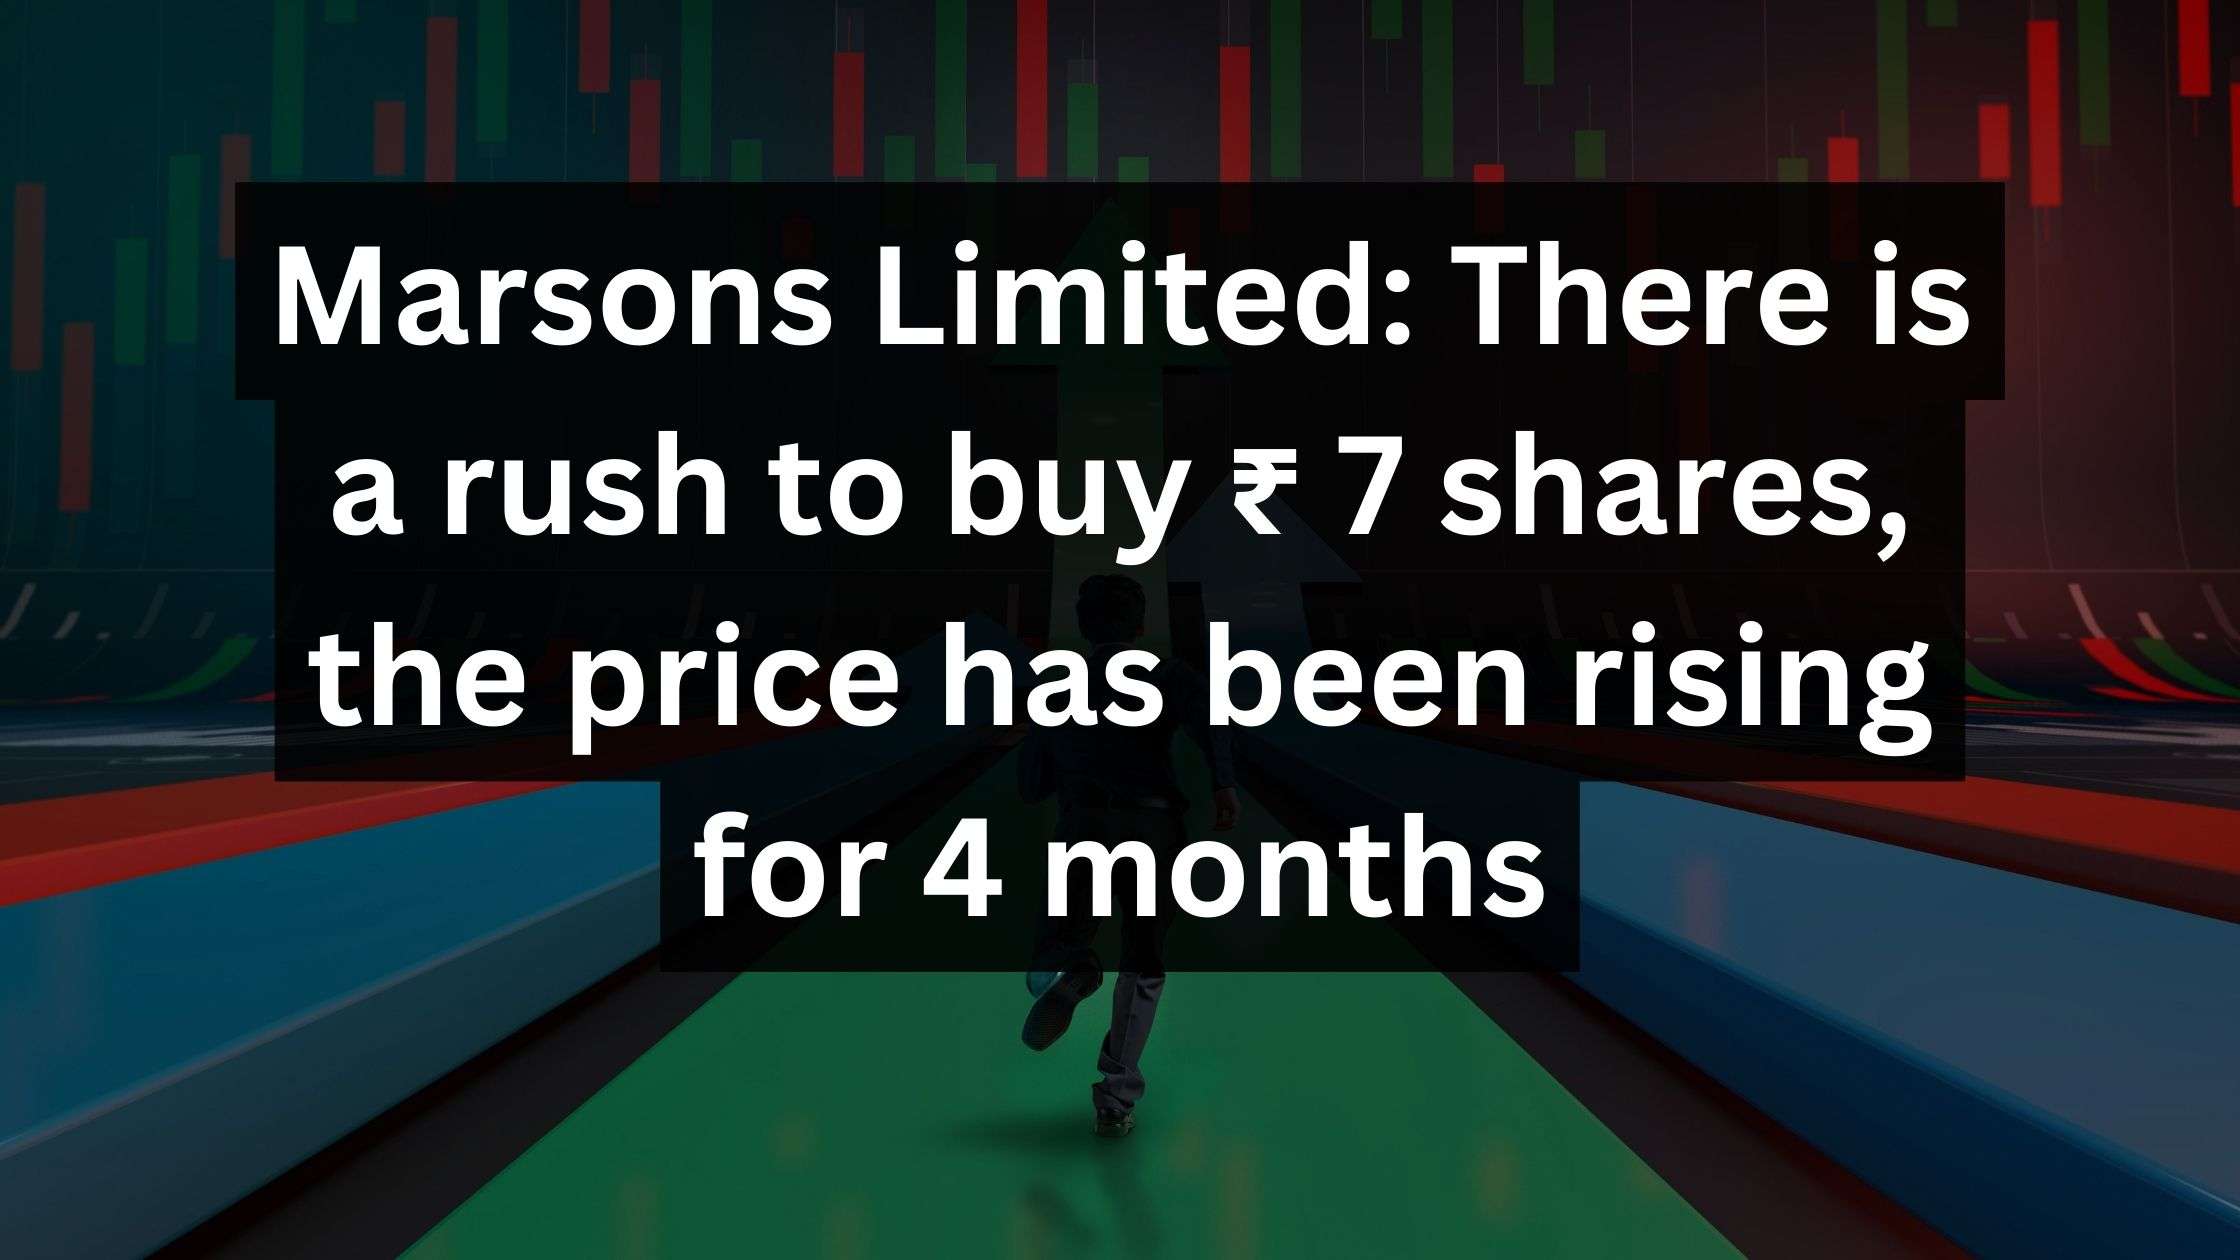 You are currently viewing Marsons Limited: There is a rush to buy ₹ 7 shares, the price has been rising for 4 months